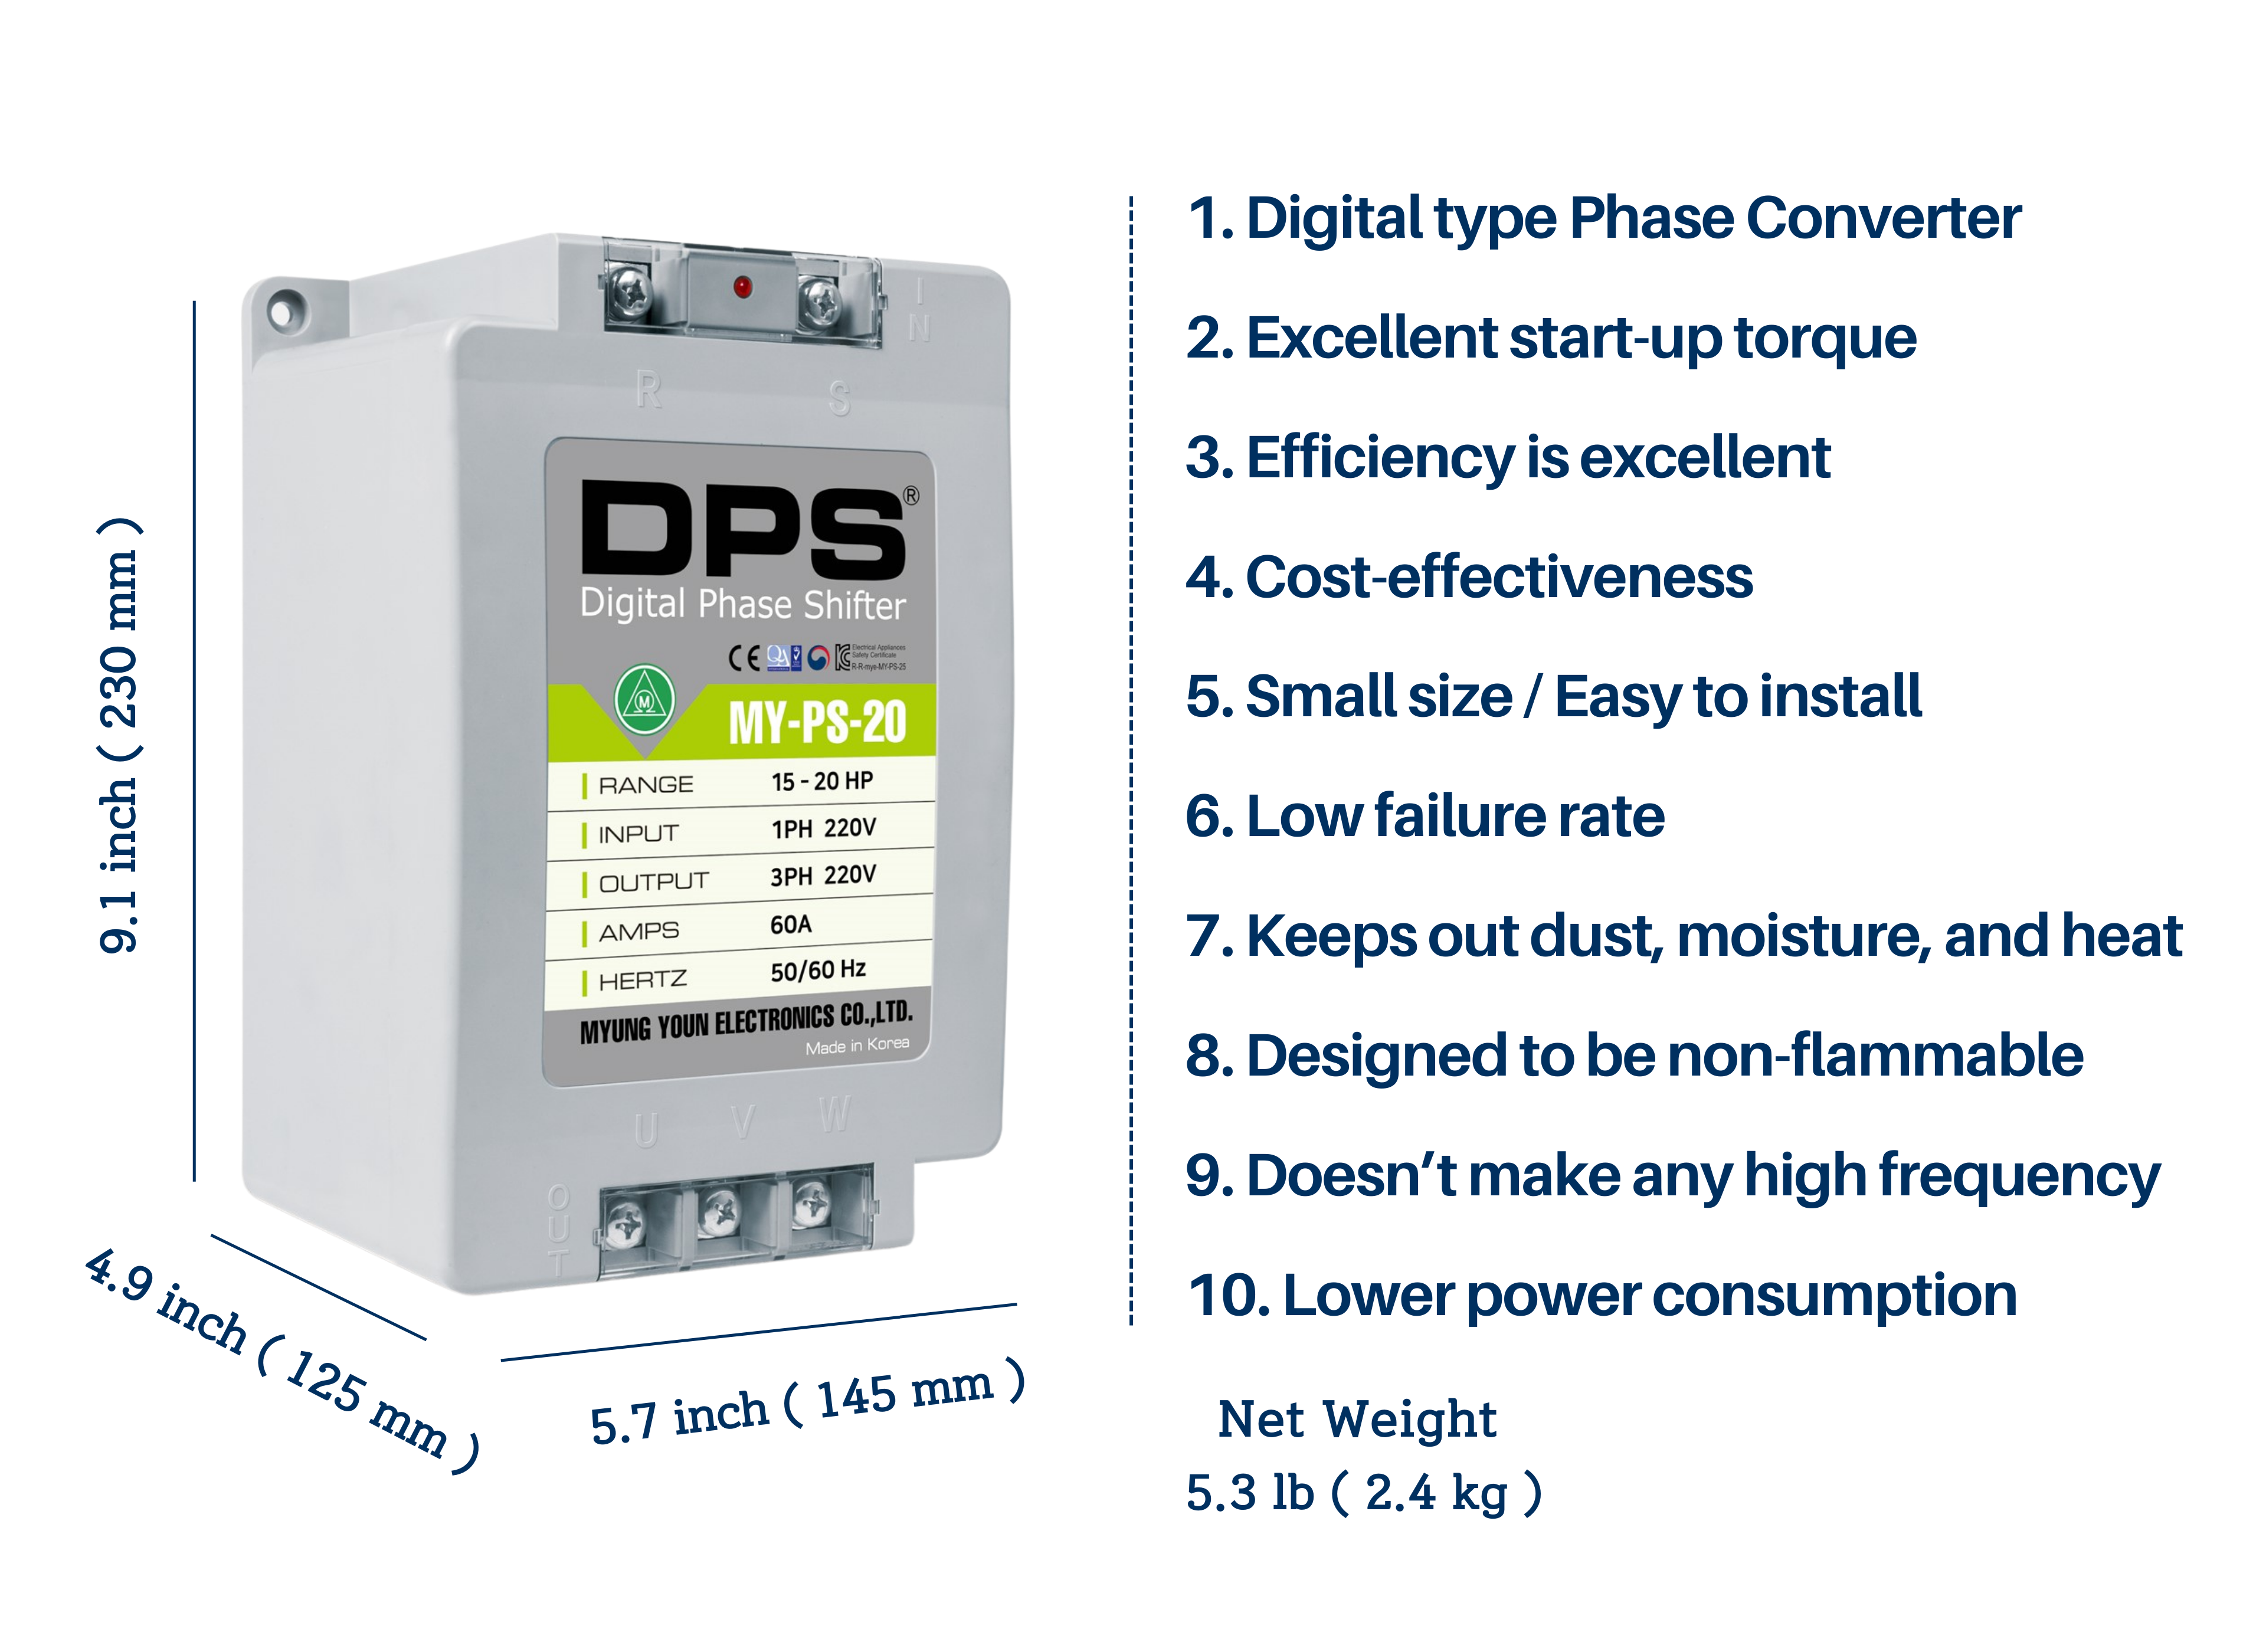 Single to Phase Converter, MY-PS-20 Model, Suitable for 200-240V  15HP(11kW) 45Amps Phase Motor, One DPS Must Be Used for One Motor Only,  Input/Output 200V-240V, Digital Type